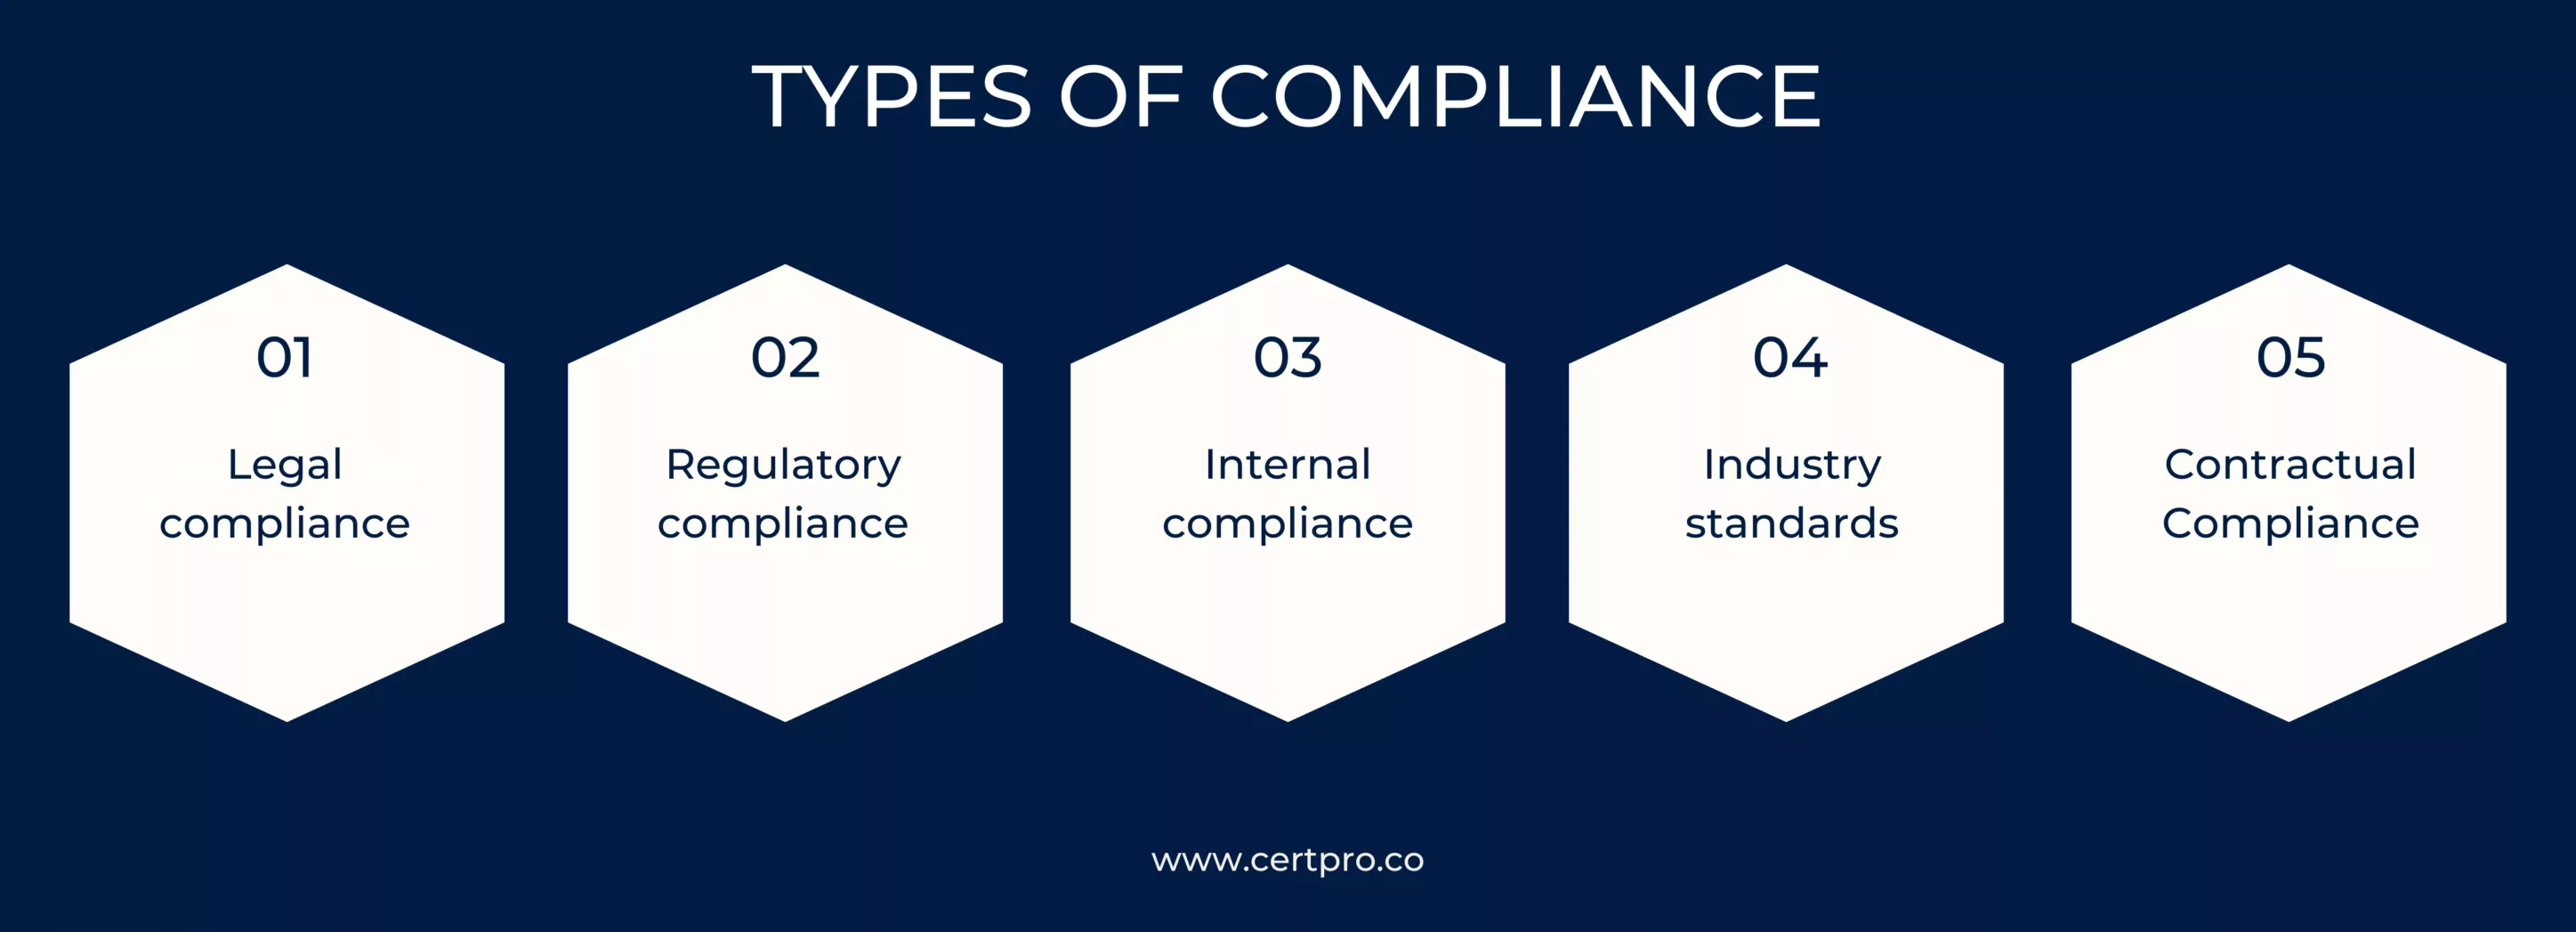 TYPES OF COMPLIANCE